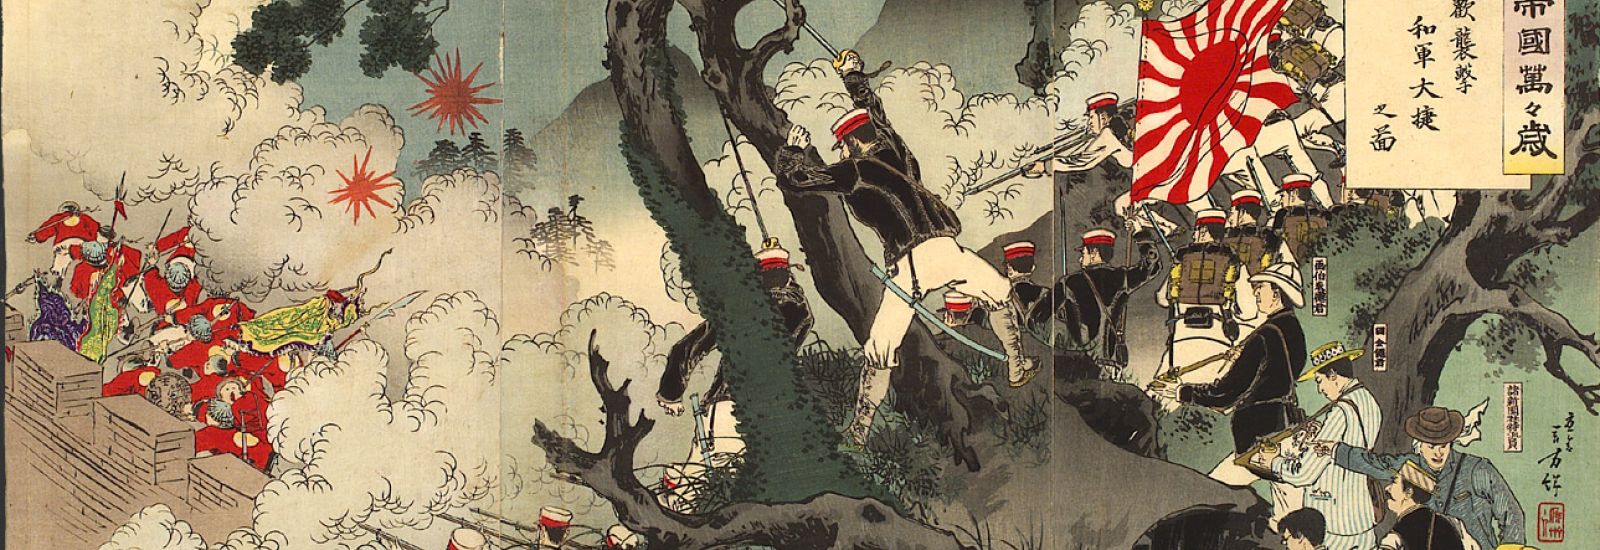 Japanese Imperial Soldiers attacking a foe, the Rising Sun Banner in the foreground.